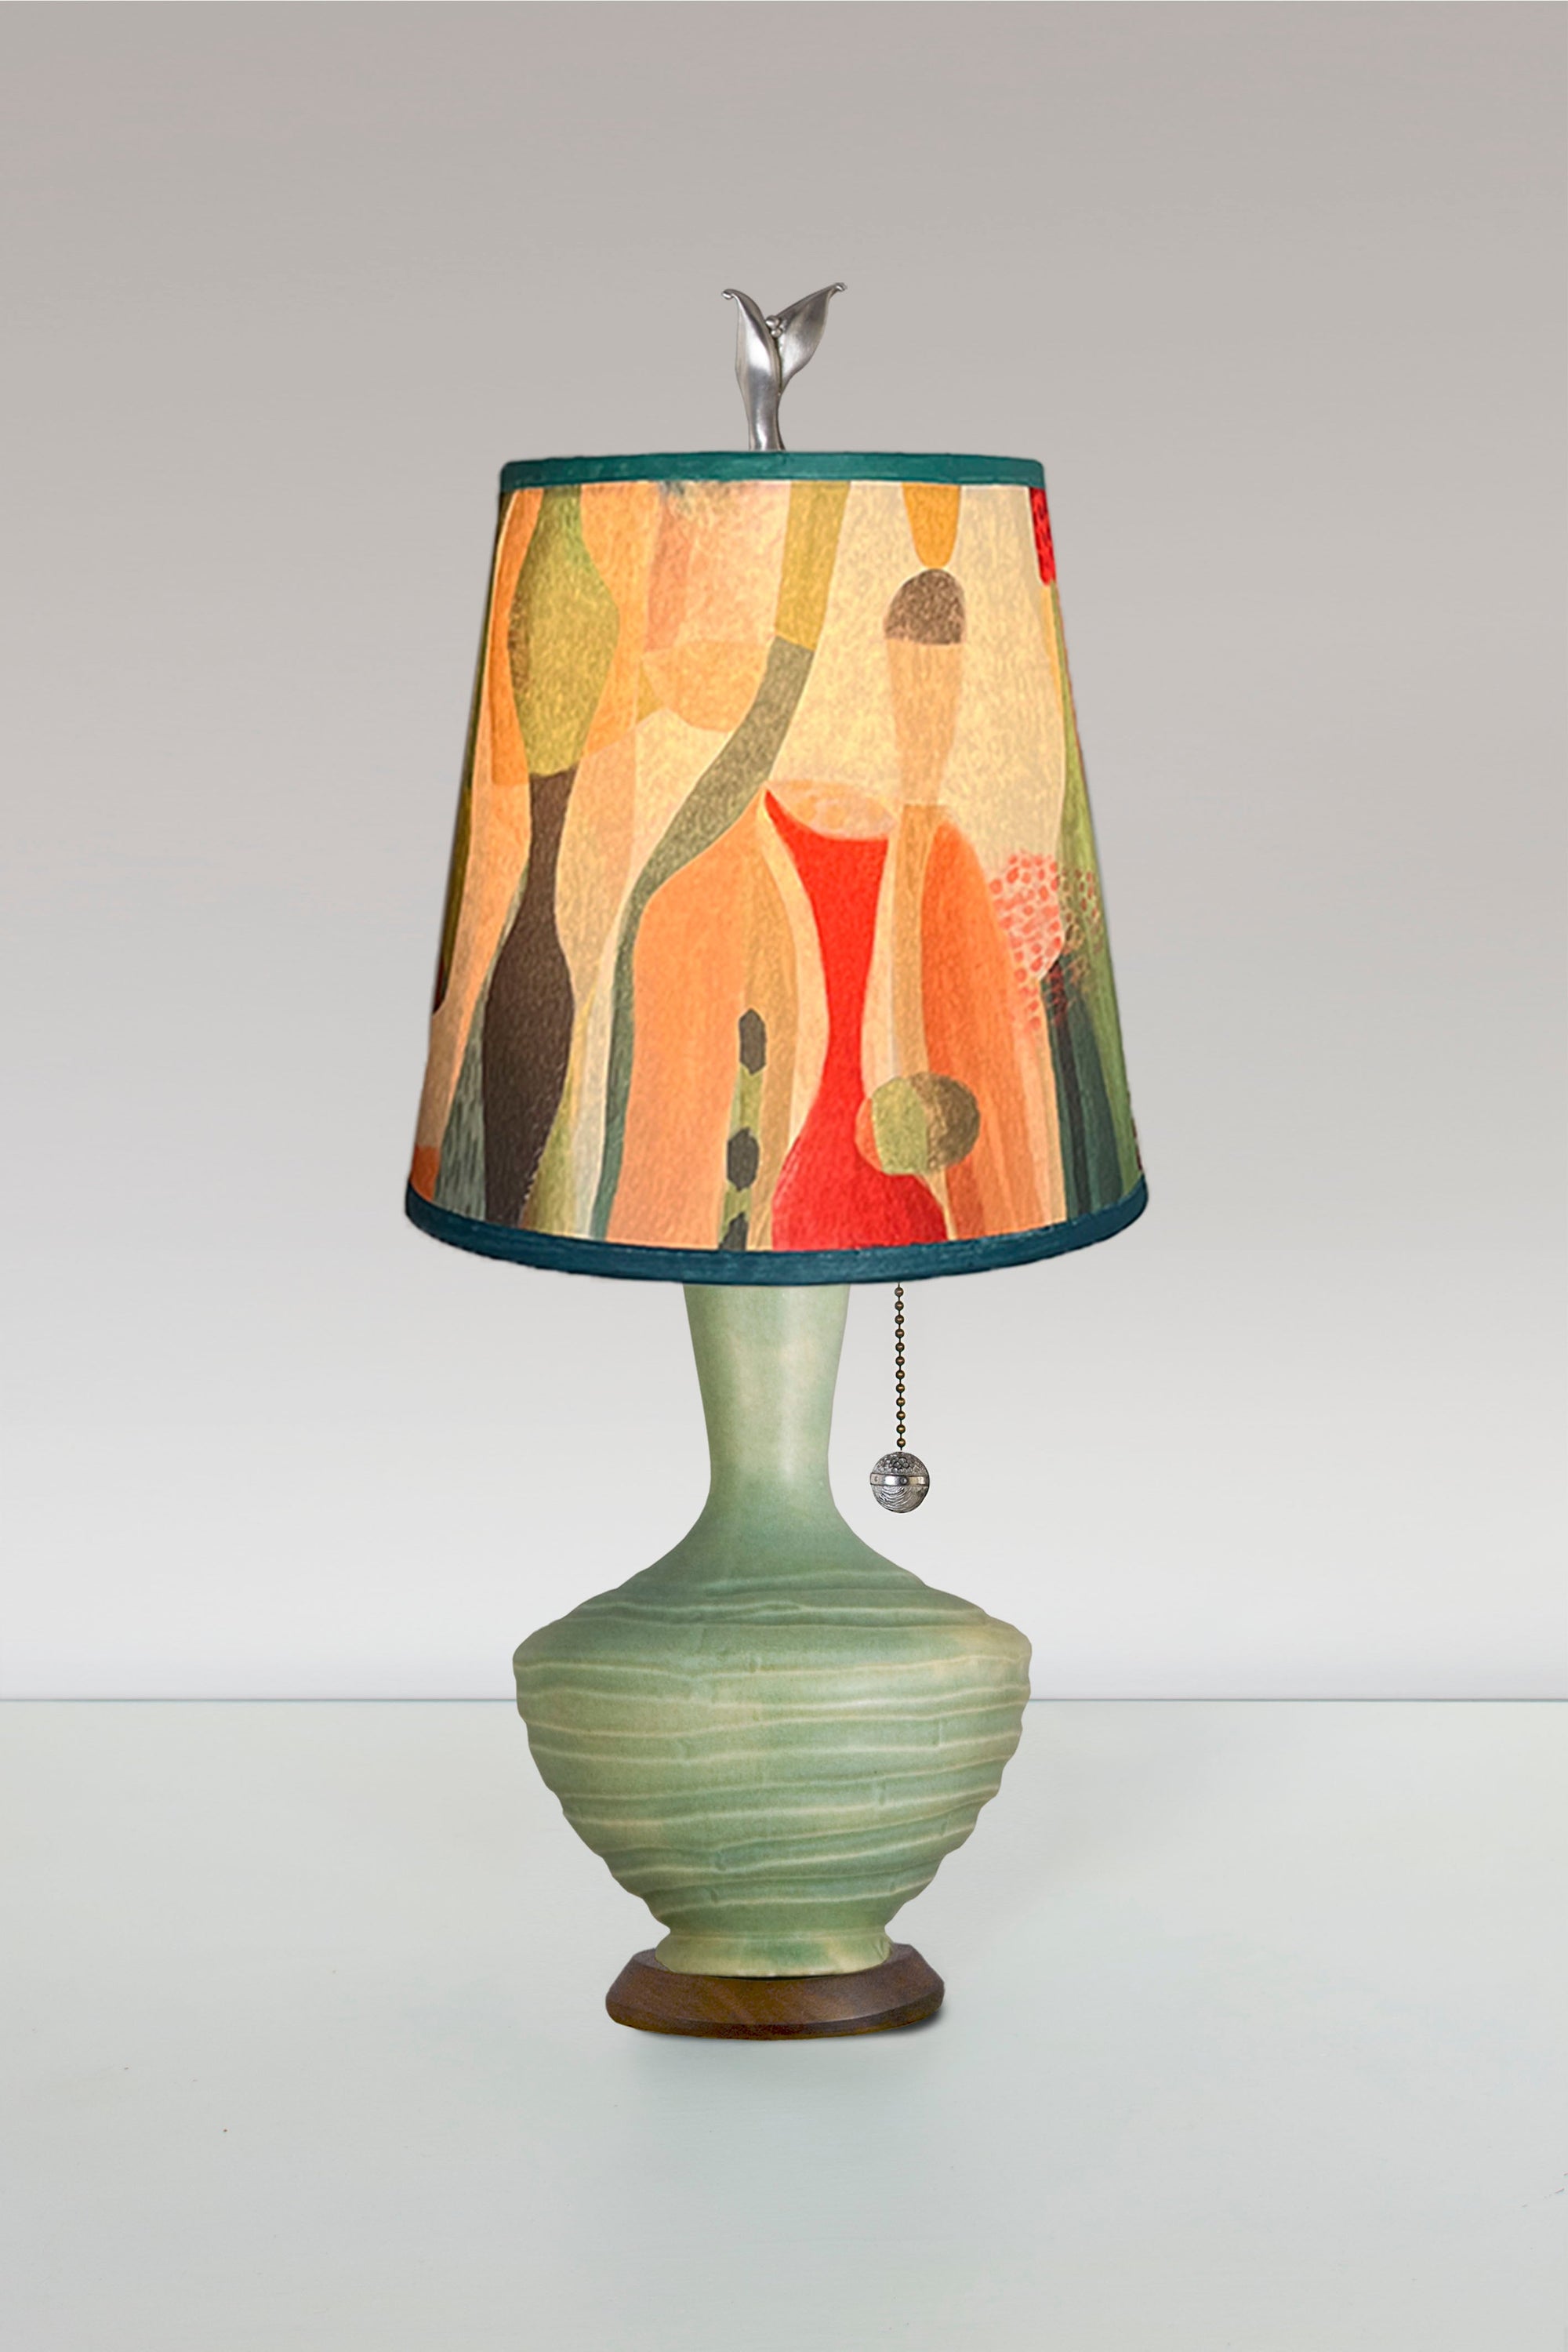 Janna Ugone & Co Table Lamp Ceramic Table Lamp in Old Copper with Small Drum Shade in Riviera in Poppy